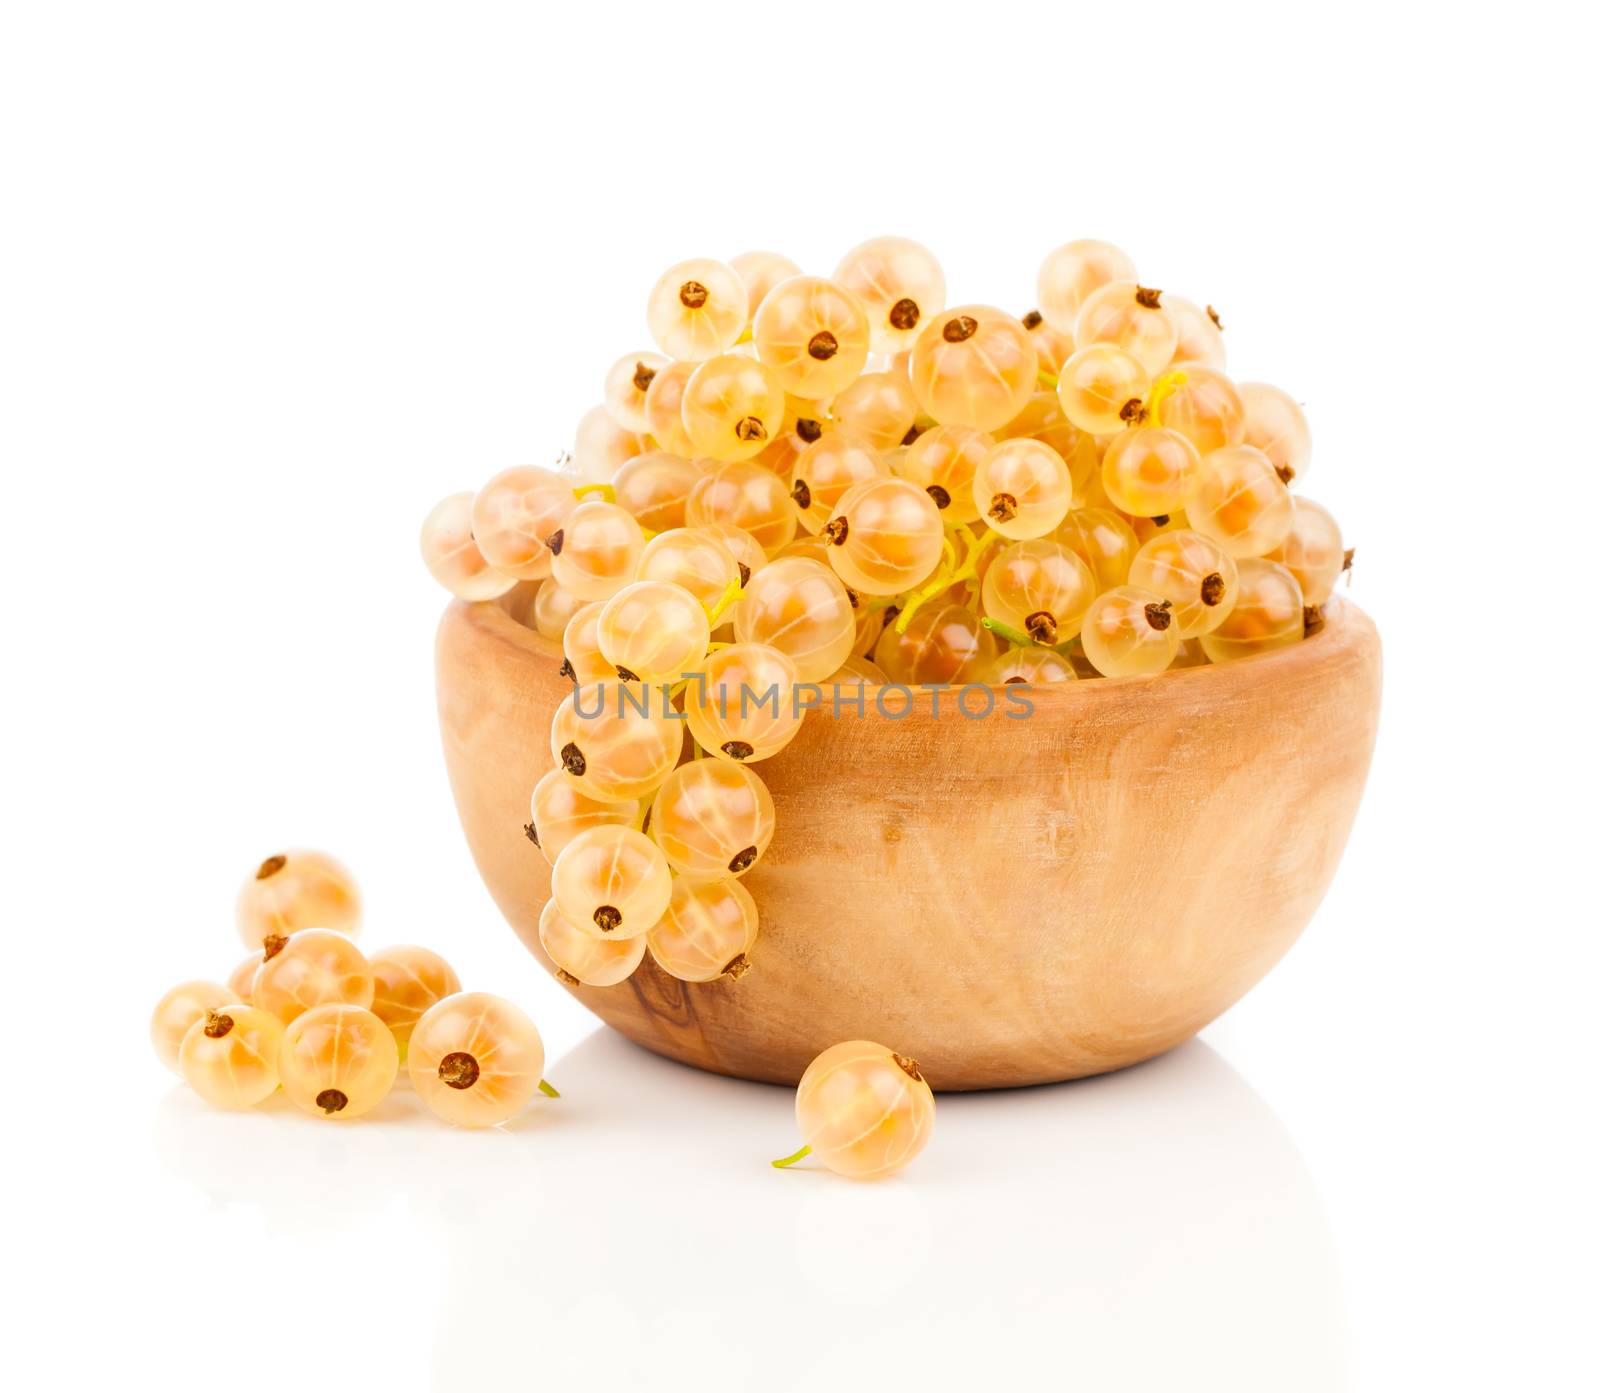 White currant fruit in a wood bowl, isolated over white backgrou by motorolka